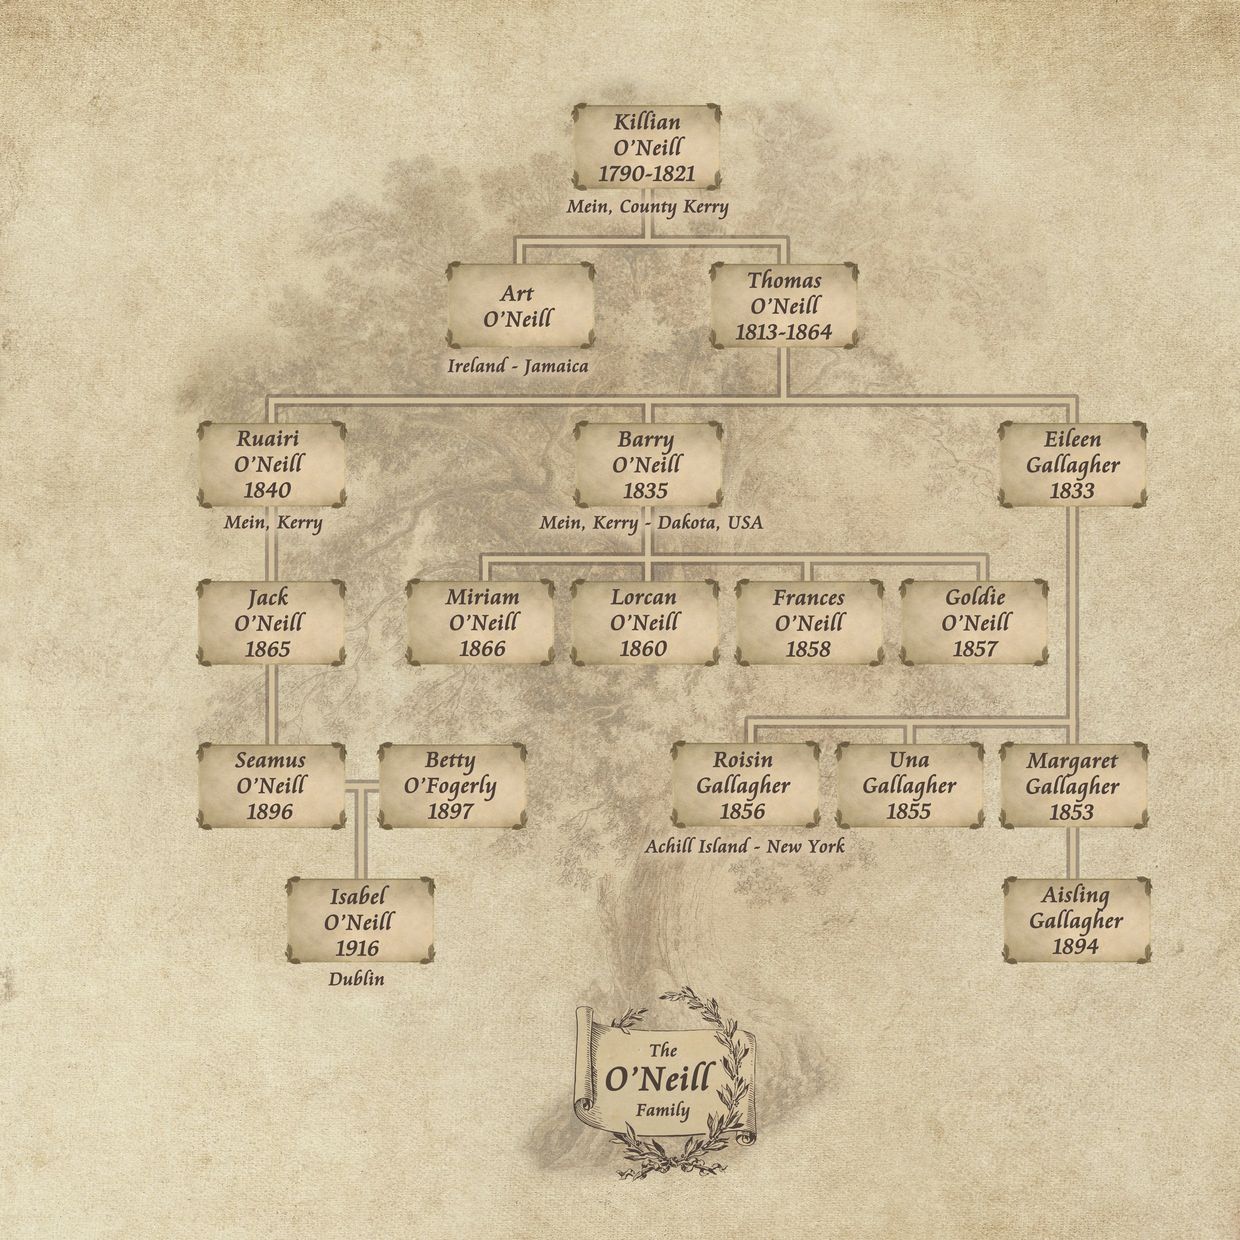 The O'Neill Family Tree
(See below for individual families)